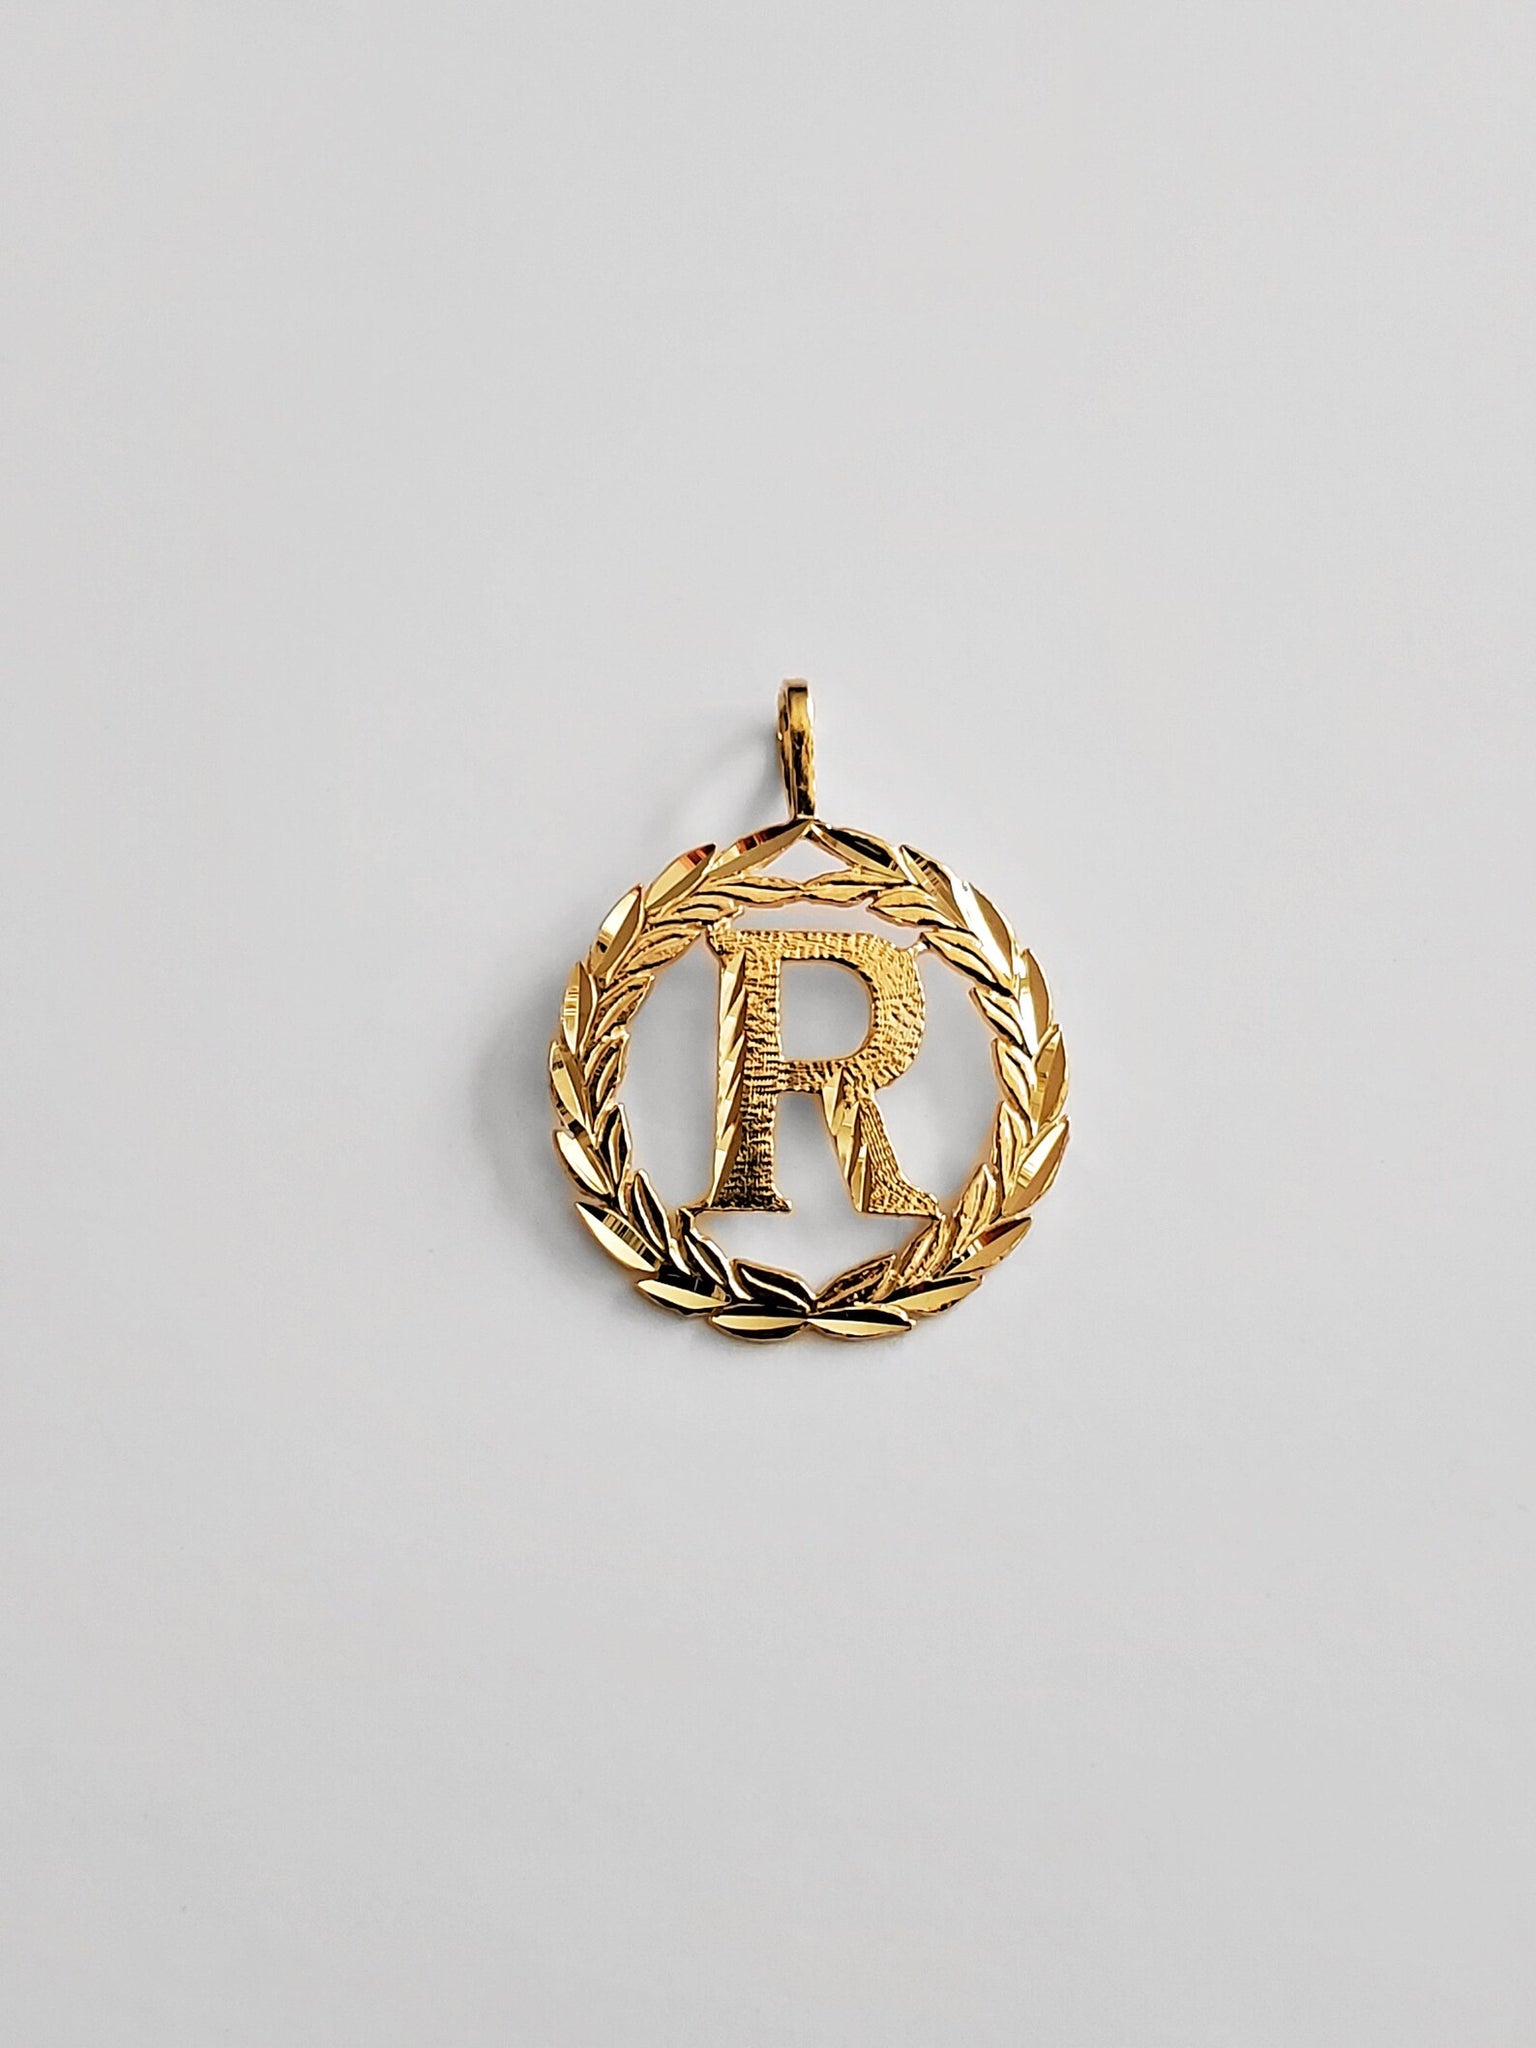 Gold Wreath R Initial Pendant | A-Z Pendants - Charlie & Co. Jewelry